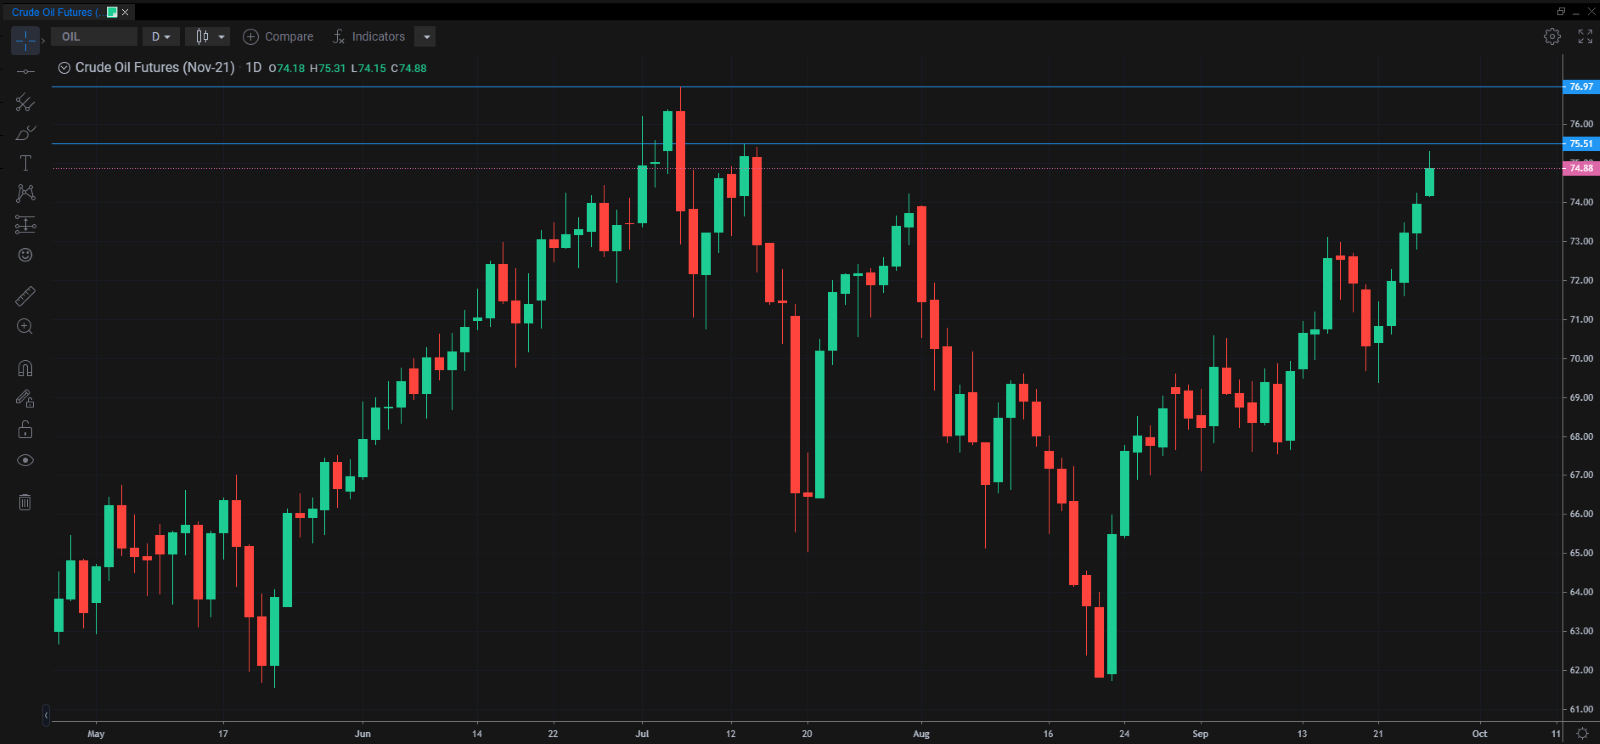 Crude Oil Futures Daily Chart